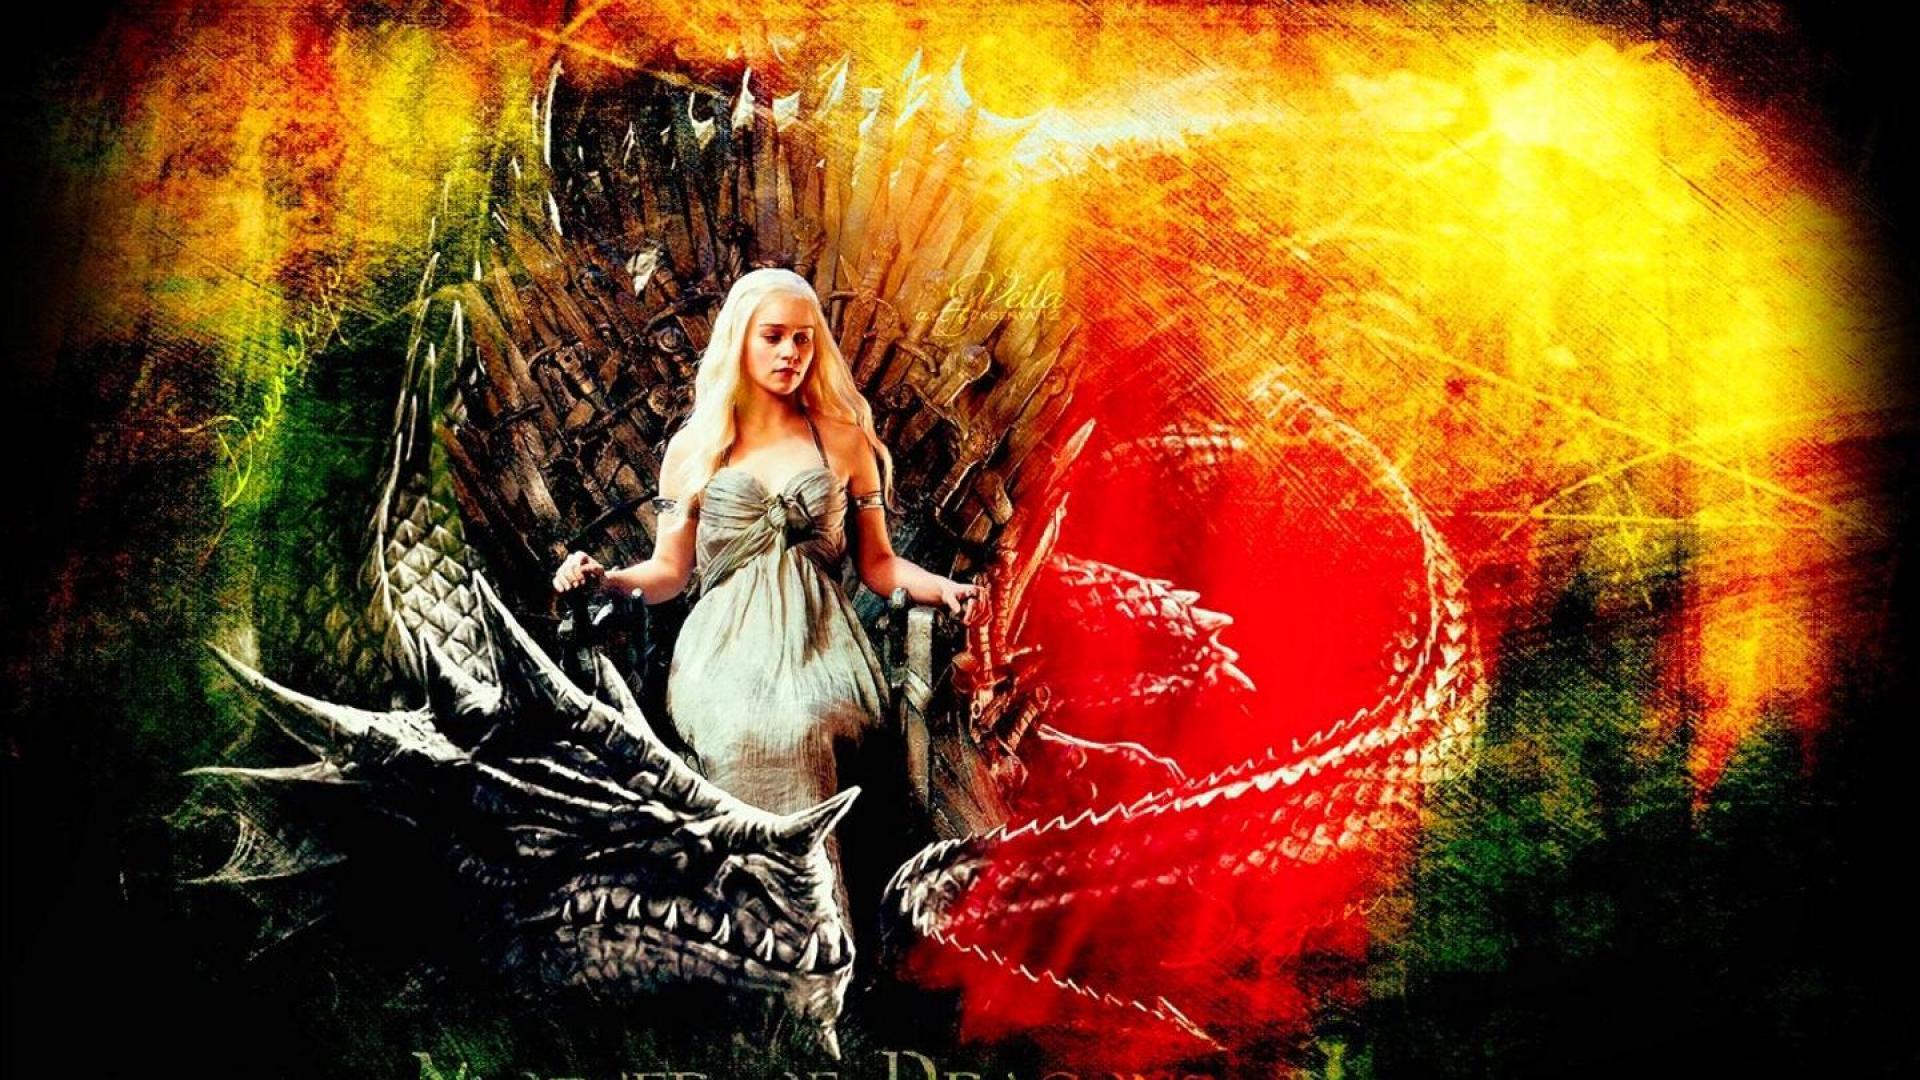 Free download Game of Thrones Mother of Dragons Wallpaper High